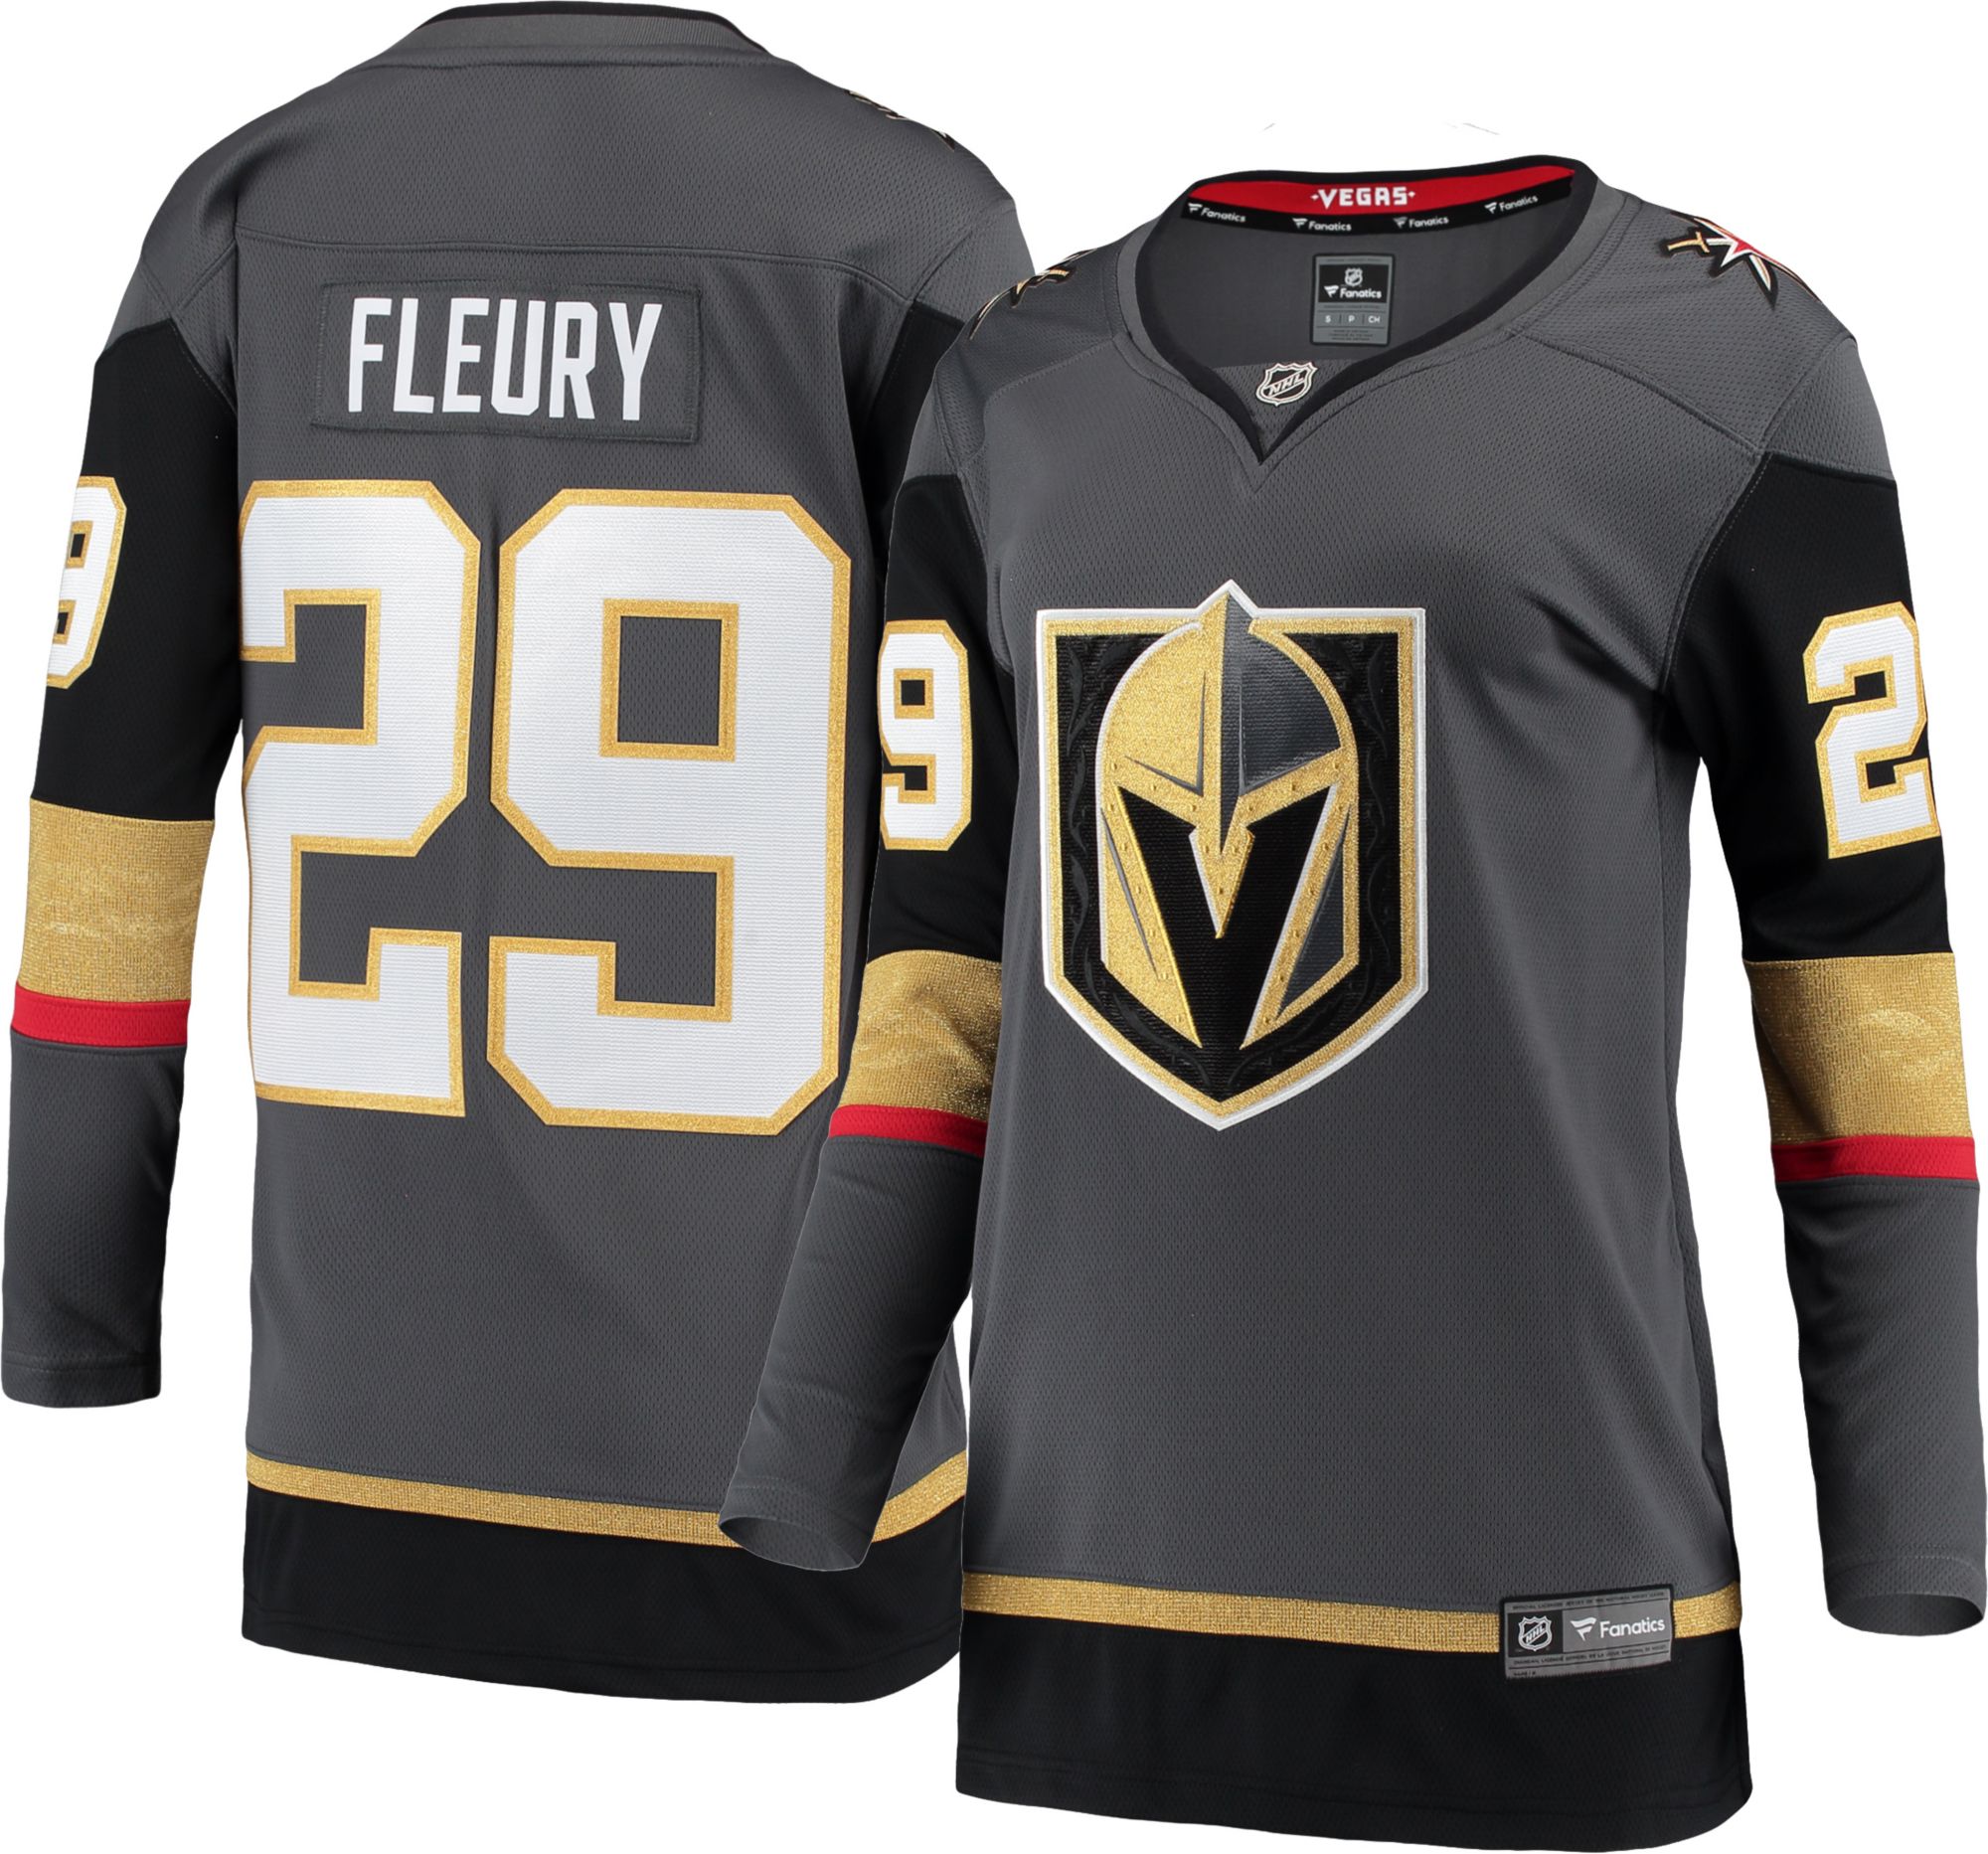 andre fleury jersey